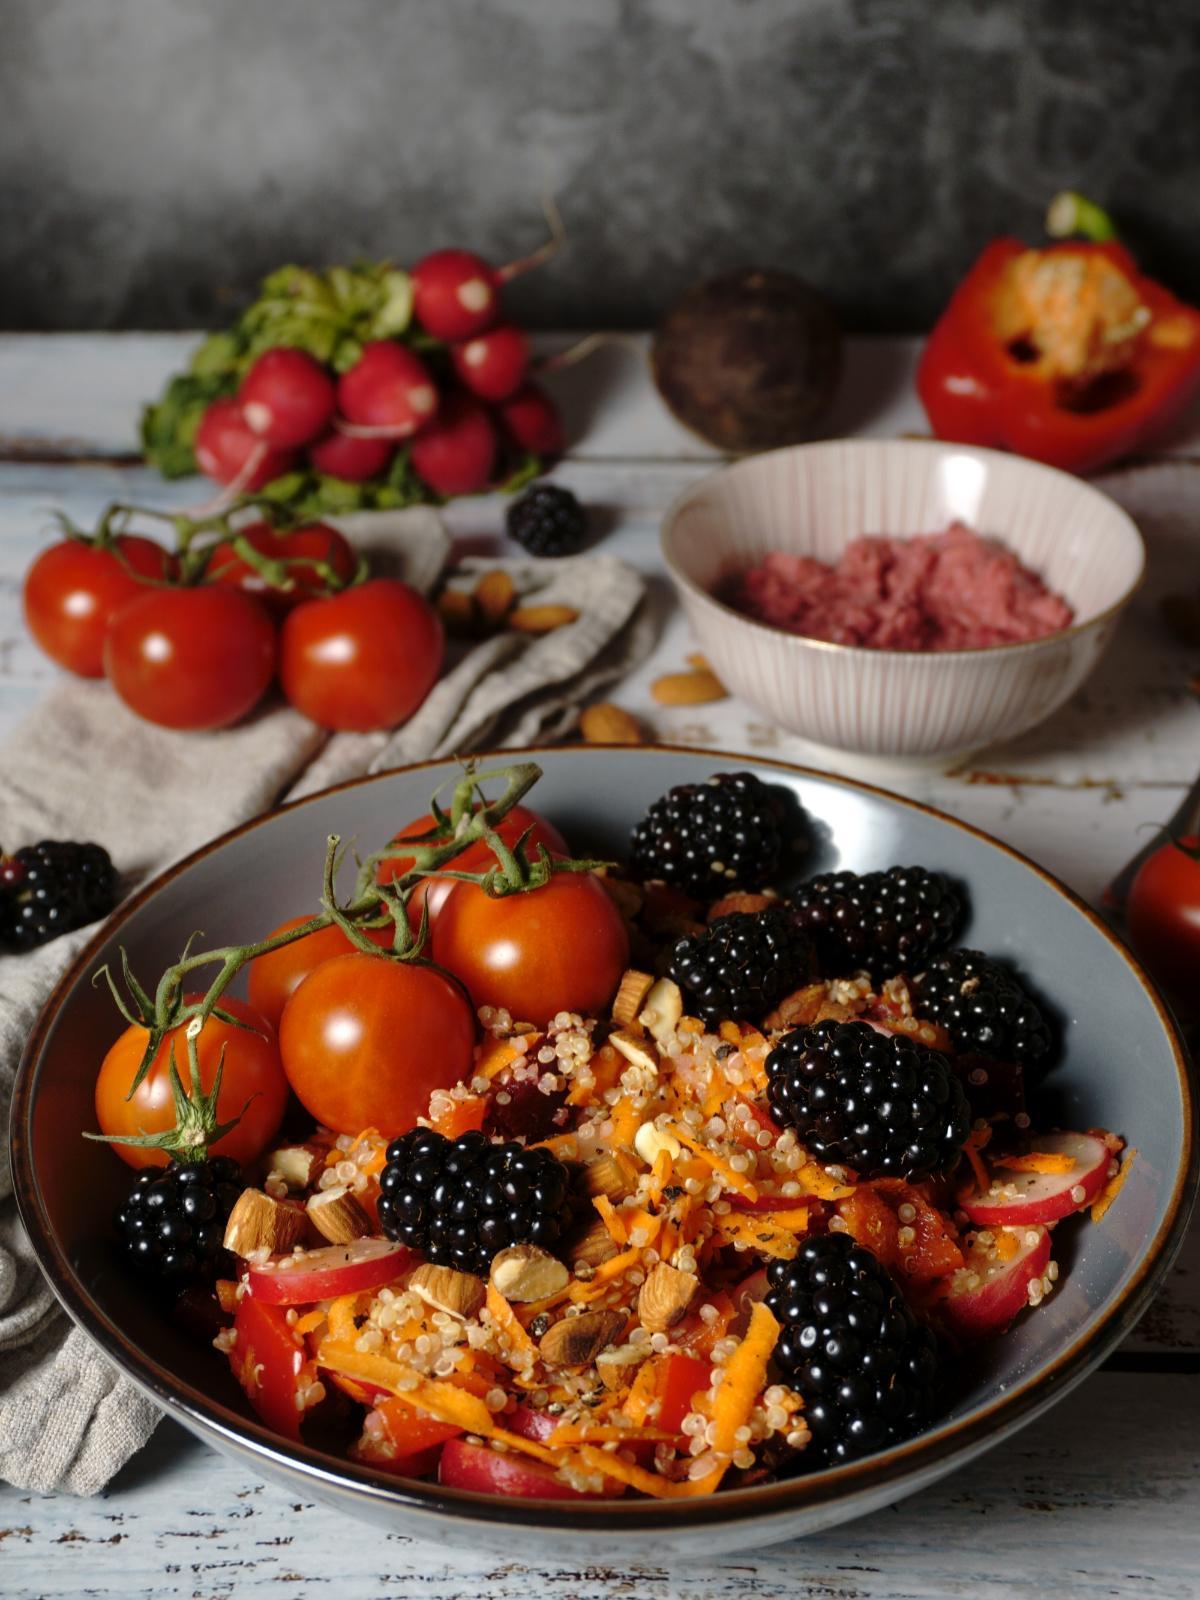 Quinoa Salad With Roasted Almonds and Blackberries 13